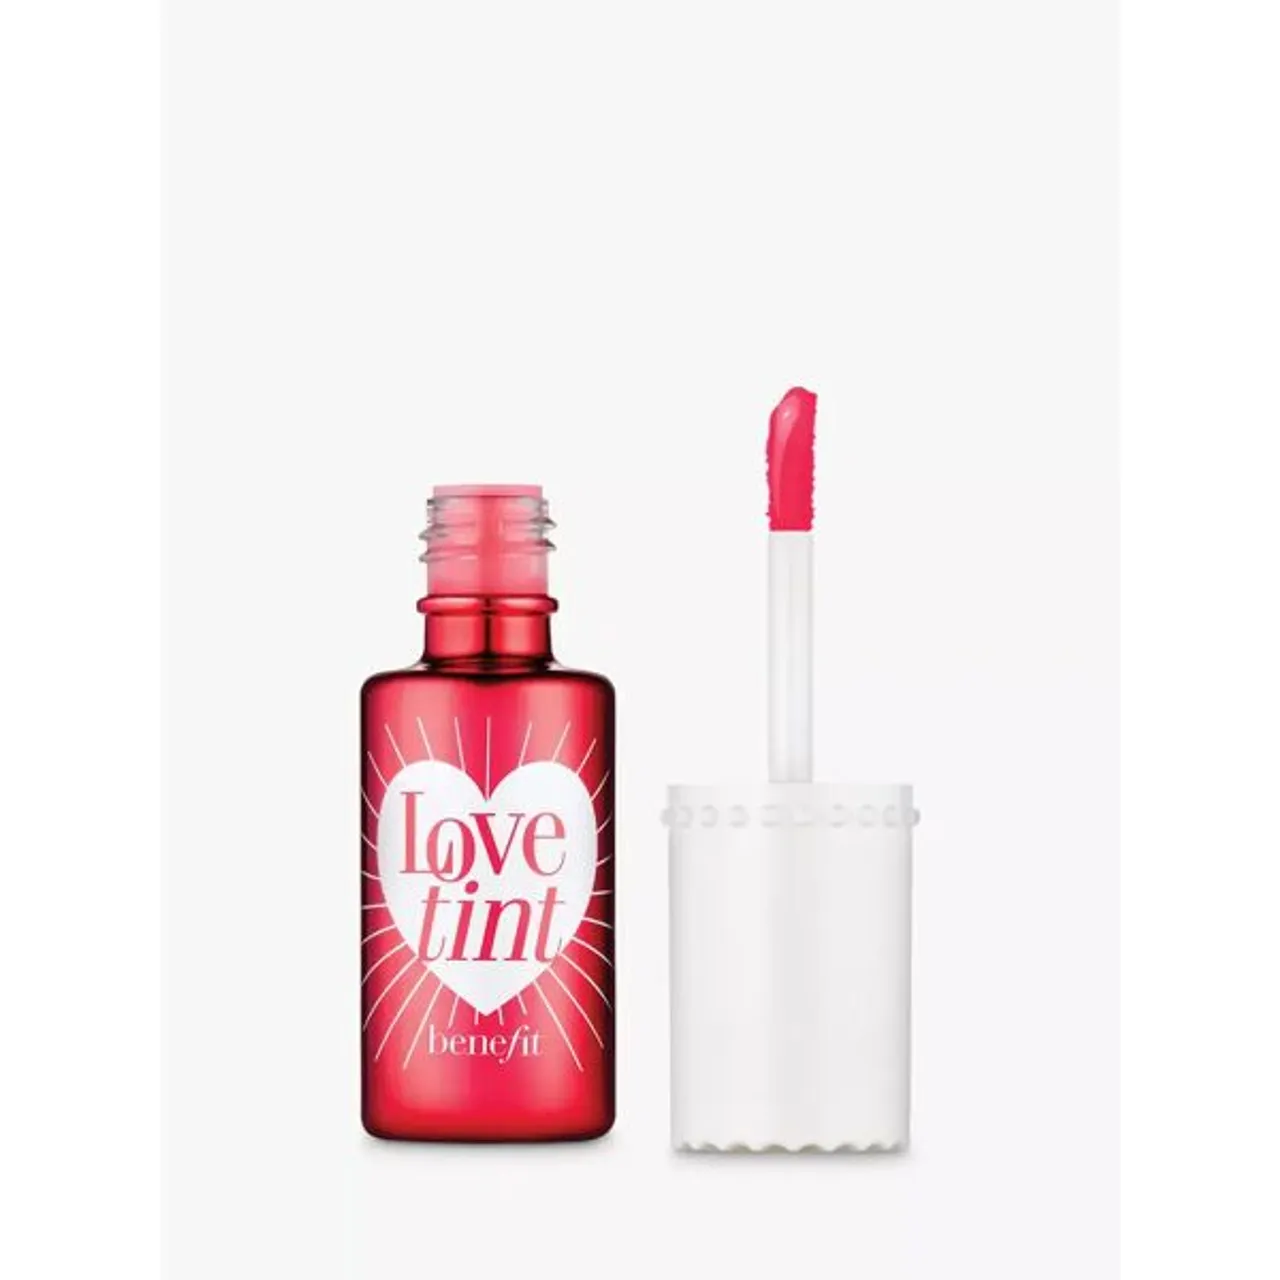 Benefit Lovetint Tinted Lip & Cheek Stain, Fiery Red - Firey Red - Unisex - Size: 6ml